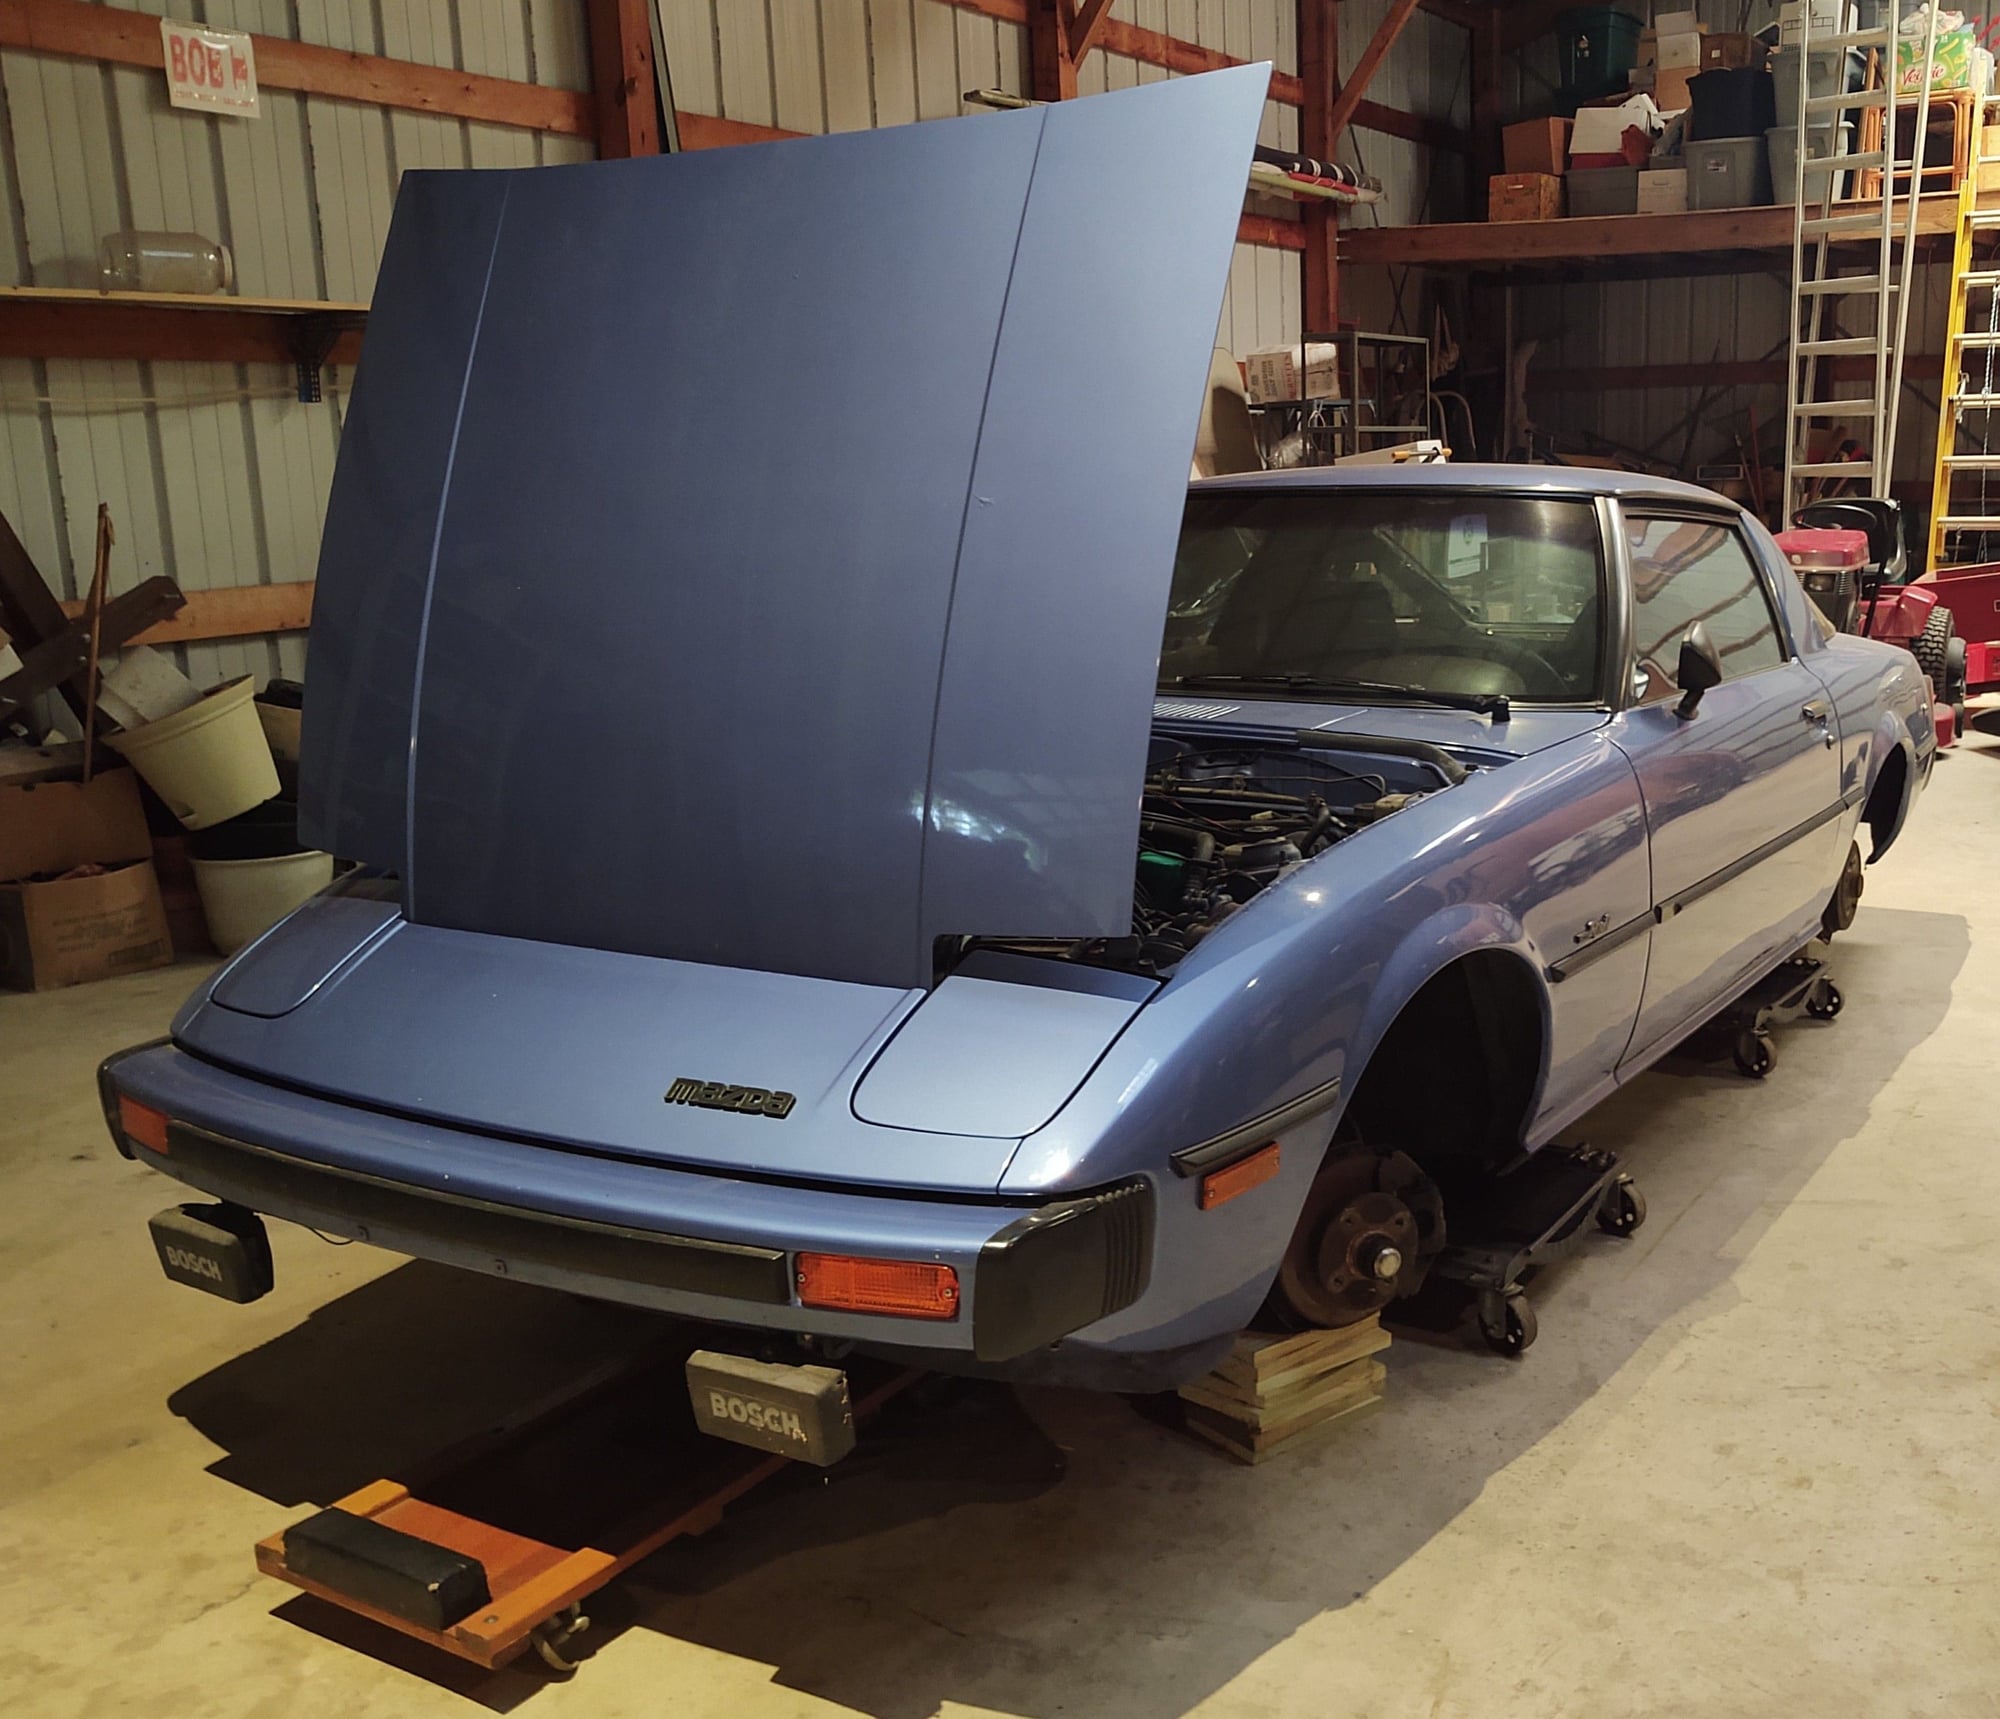 1979 Mazda RX-7 - Coming soon, 1st gen 1979 (delivered 1978) one owner - Used - VIN SA22C609027 - Other - 2WD - Manual - Coupe - Blue - Vandalia, MI 49095, United States